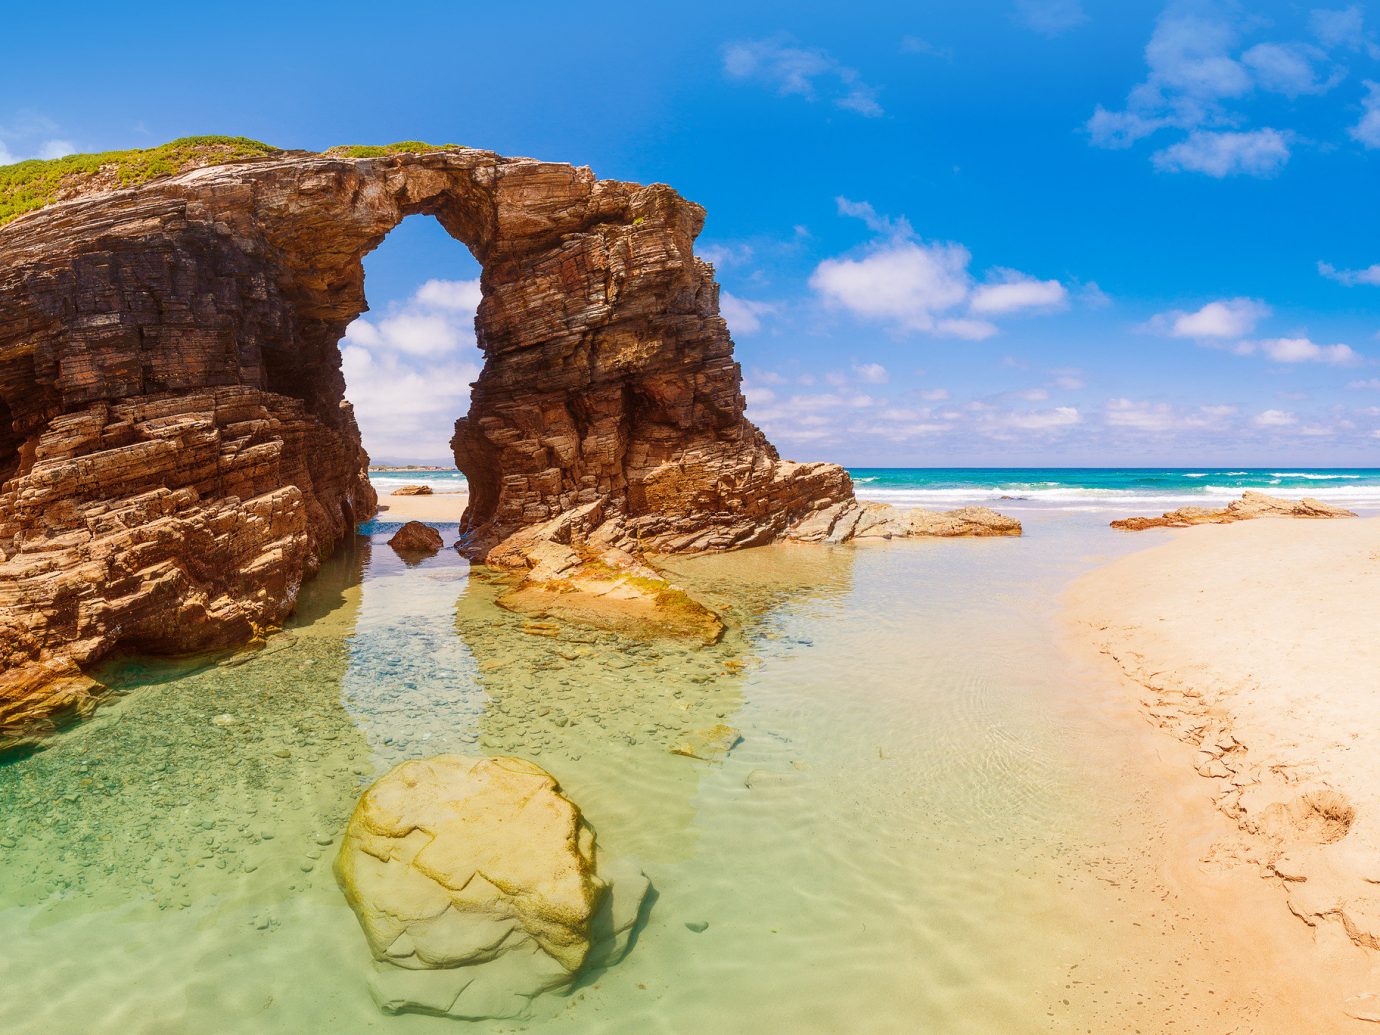 Nature body of water outdoor Sea rock sky Coast coastal and oceanic landforms formation shore natural arch Beach terrain water Ocean vacation sand promontory cliff tourism